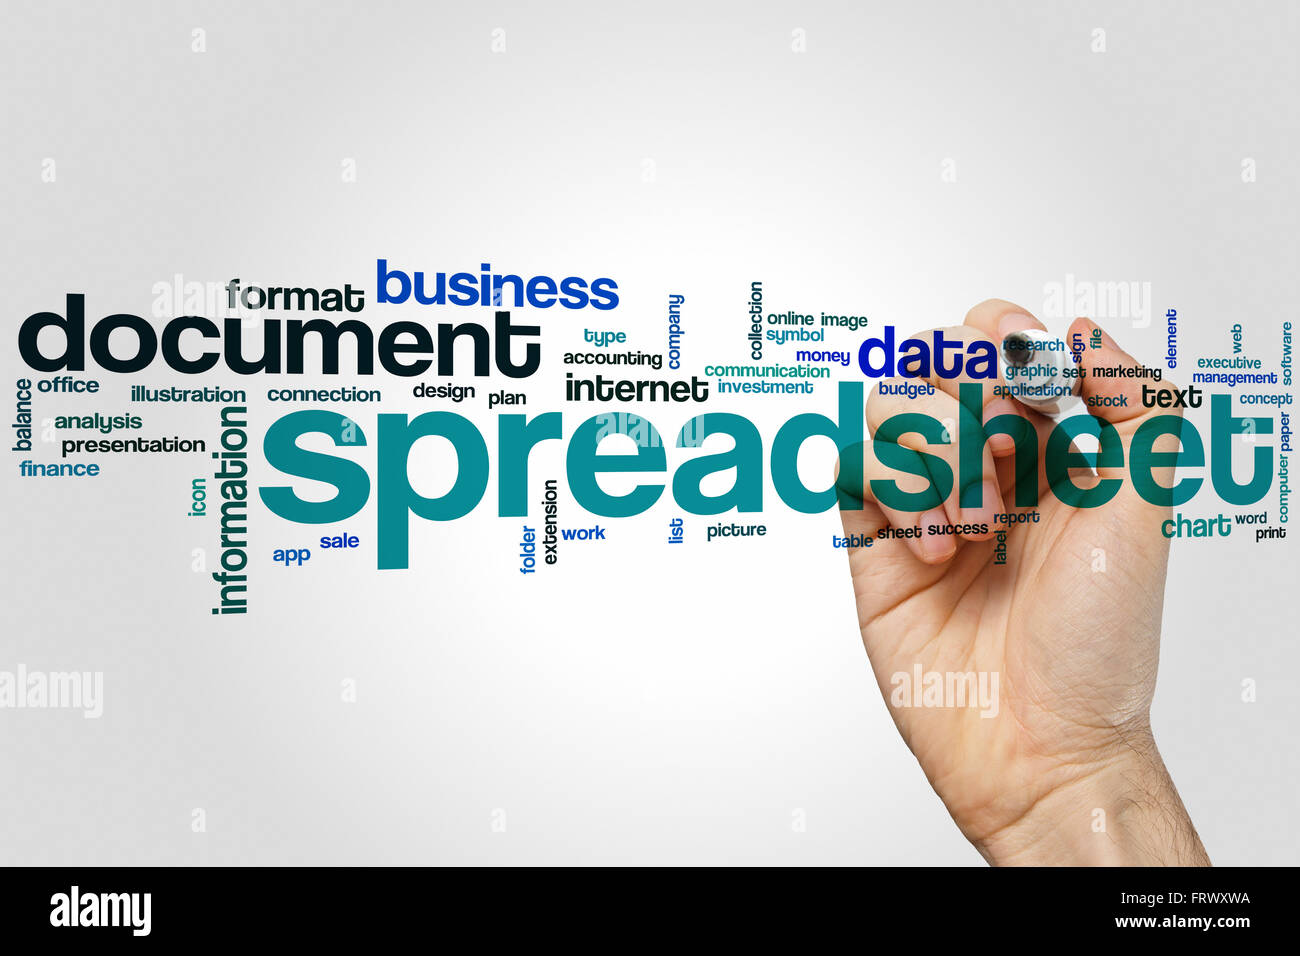 Spreadsheet word cloud concept with document data related tags Stock Photo